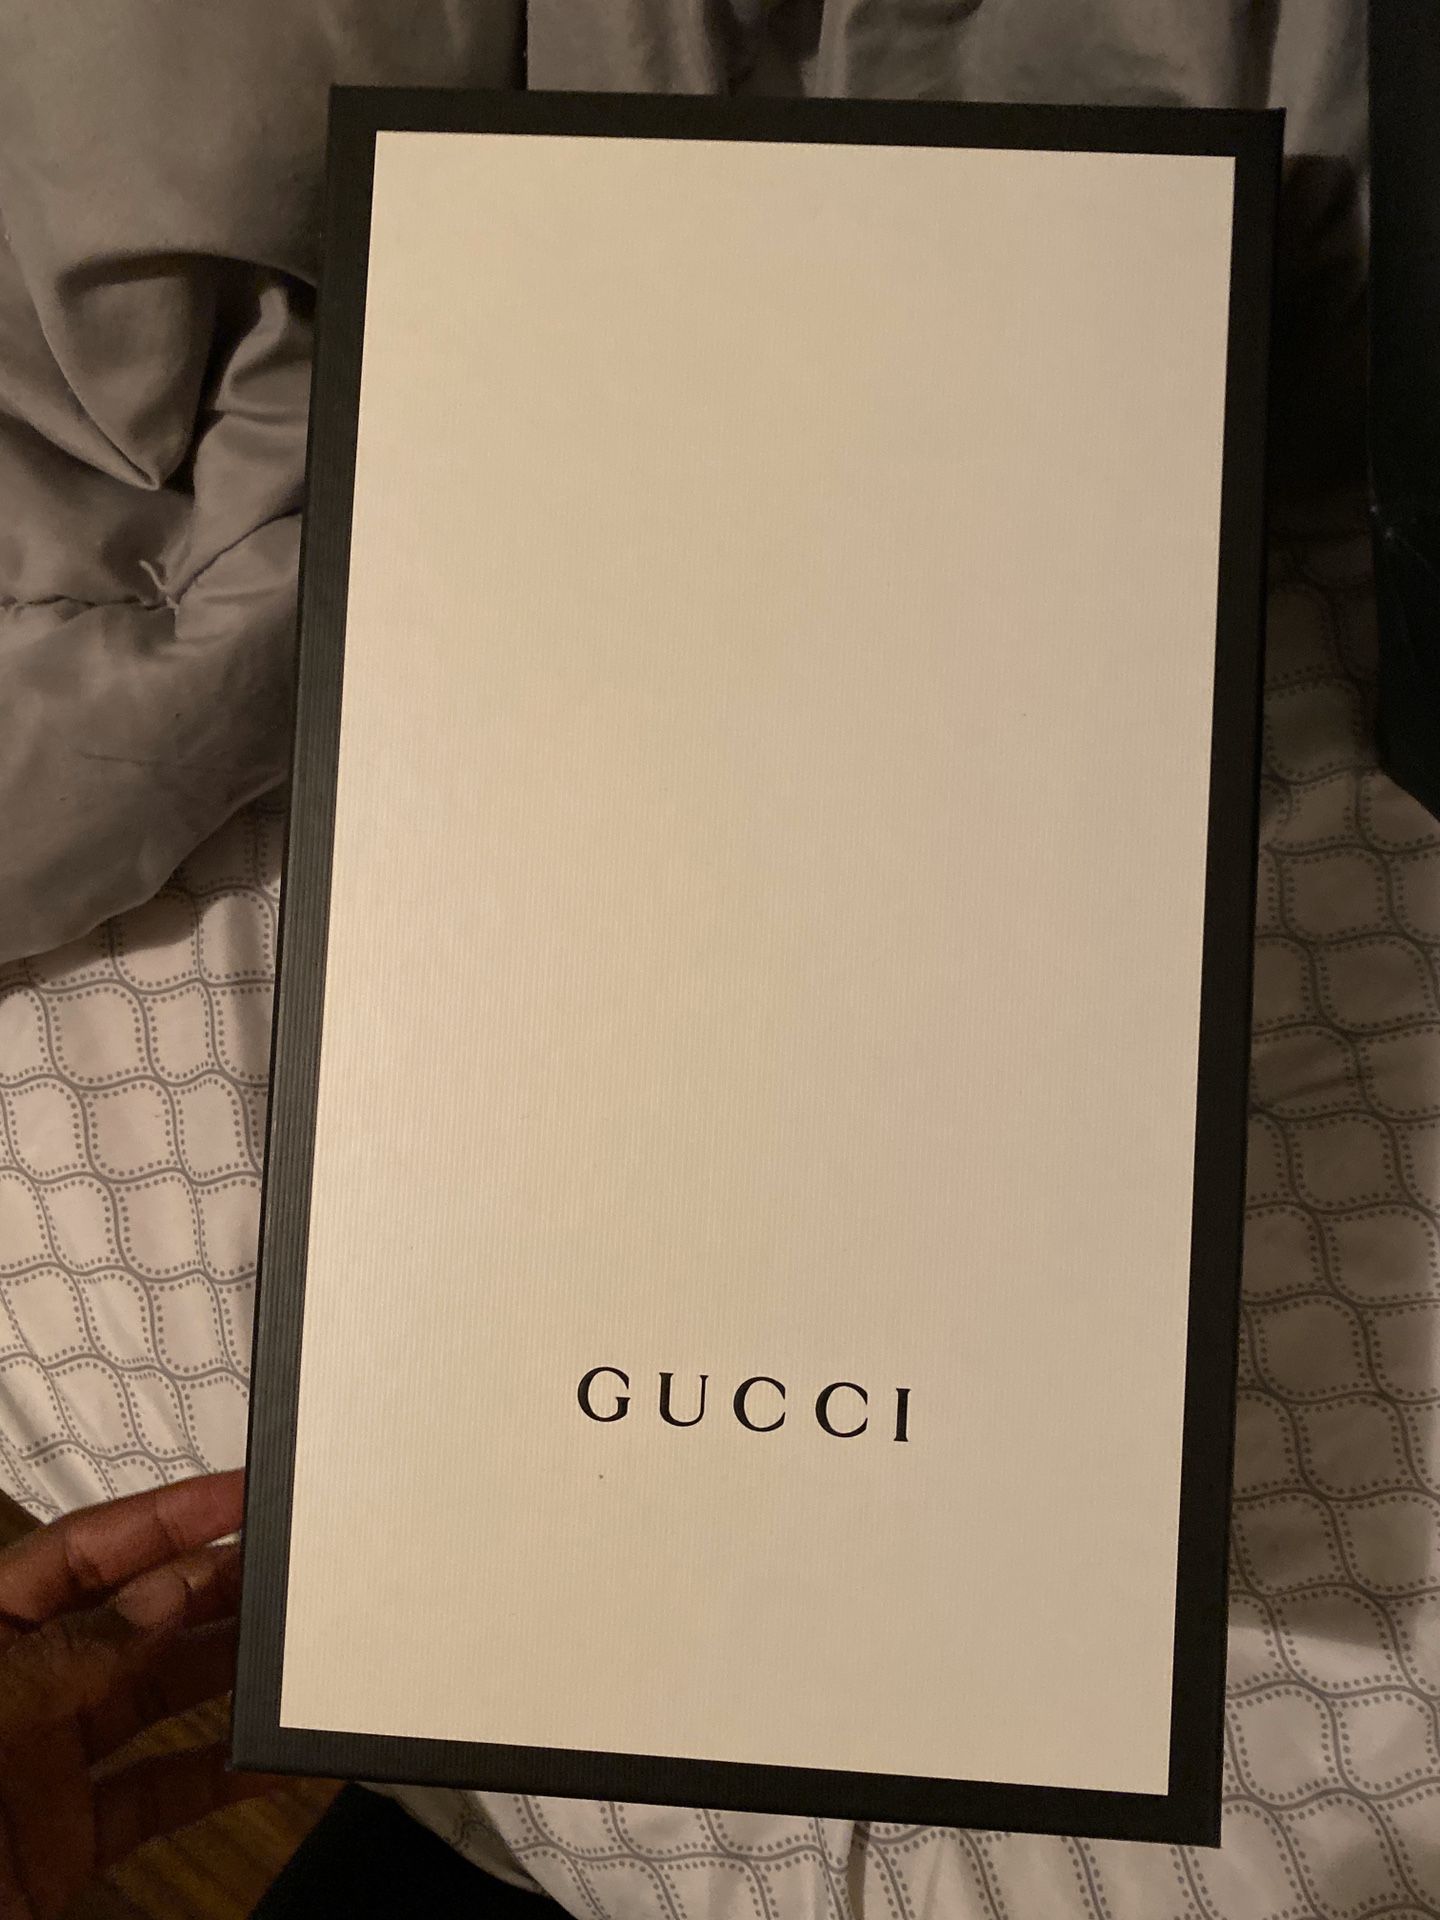 Gucci slides size 11 brand new comes with receipt!